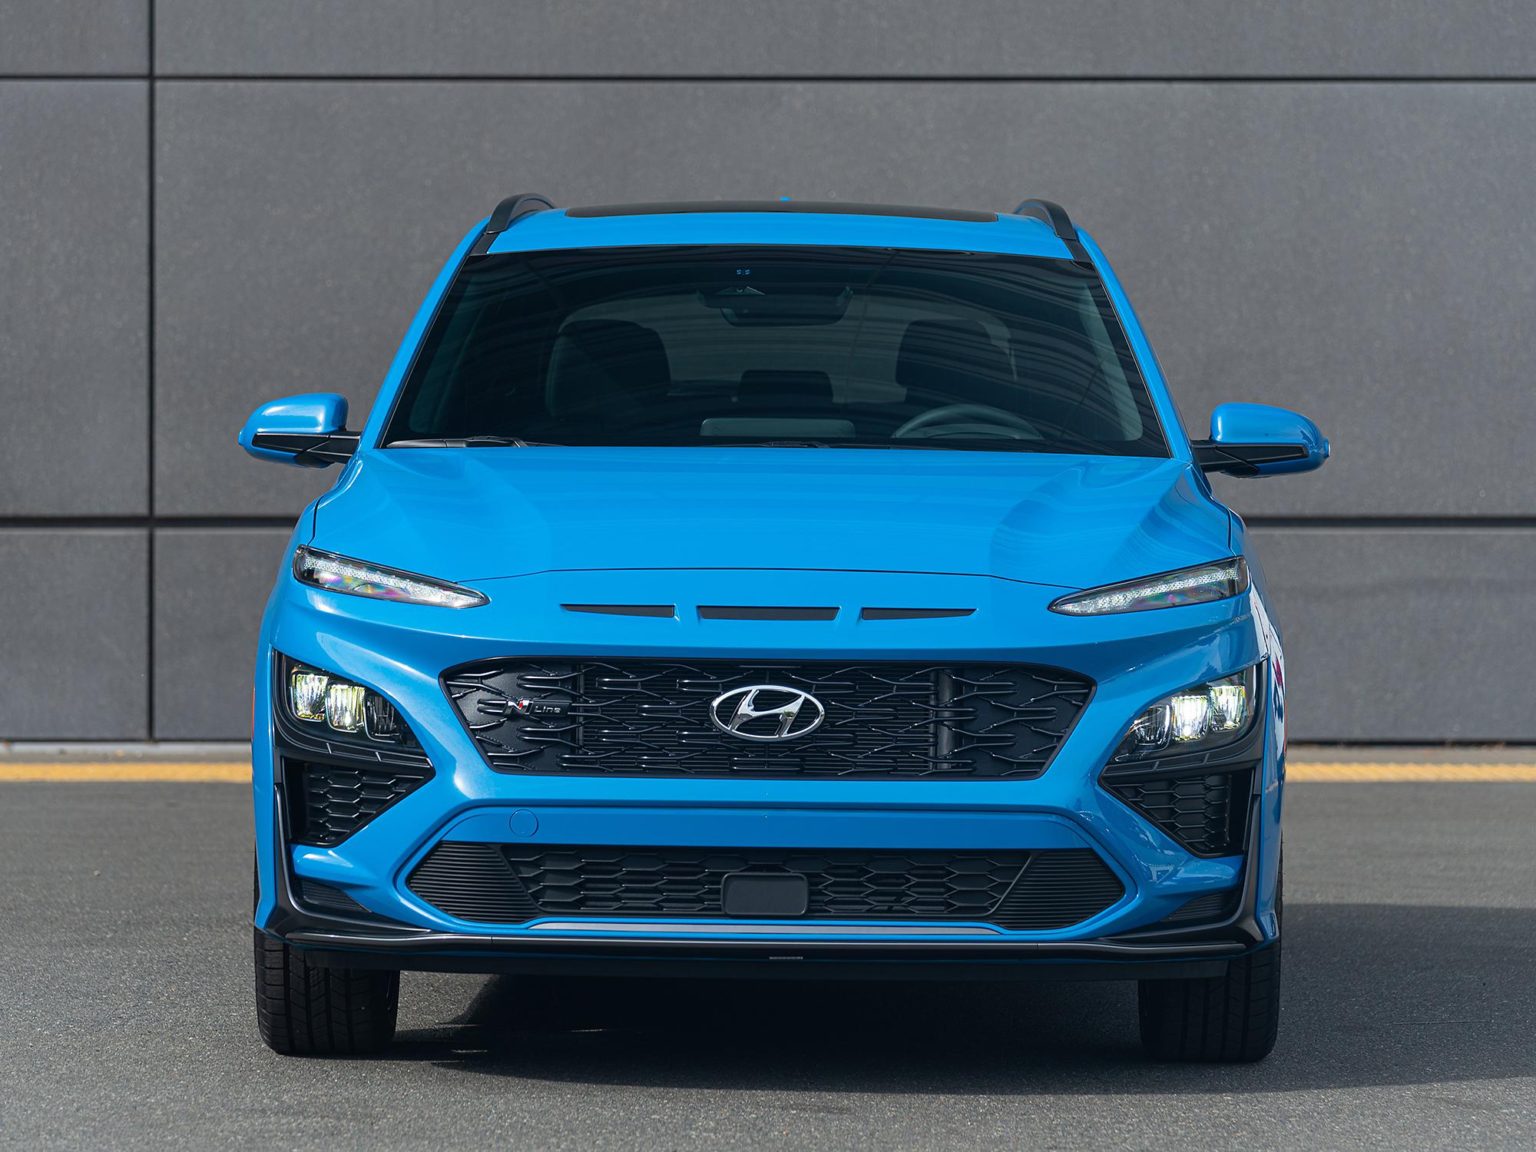 The Hyundai Kona has been given a facelift and new variant for the 2022 model year.